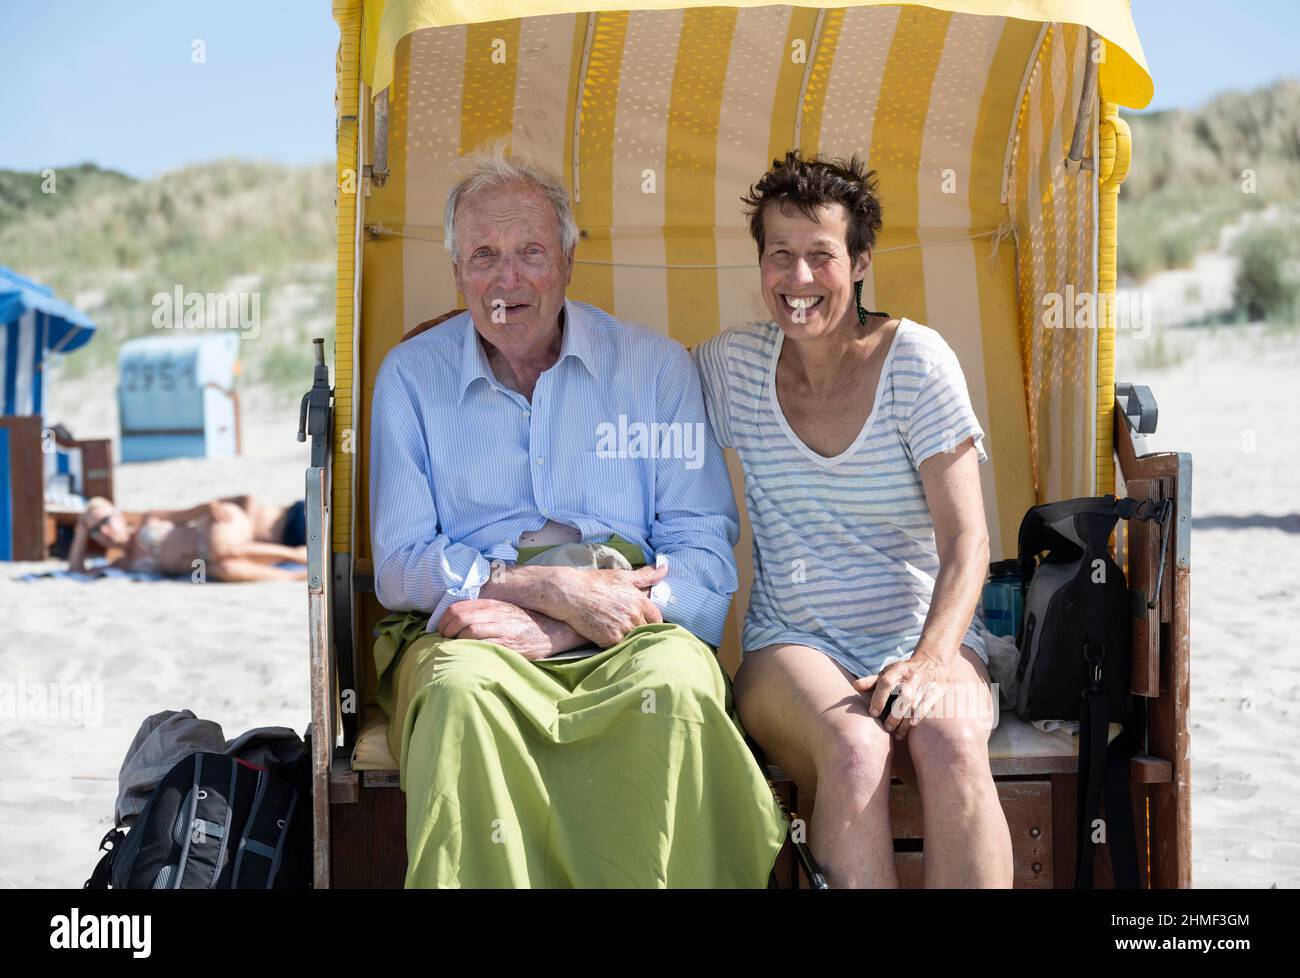 Tourists sitting in a beach chair, Juist Island, North Sea, East Frisia, Lower Saxony, Germany Stock Photo